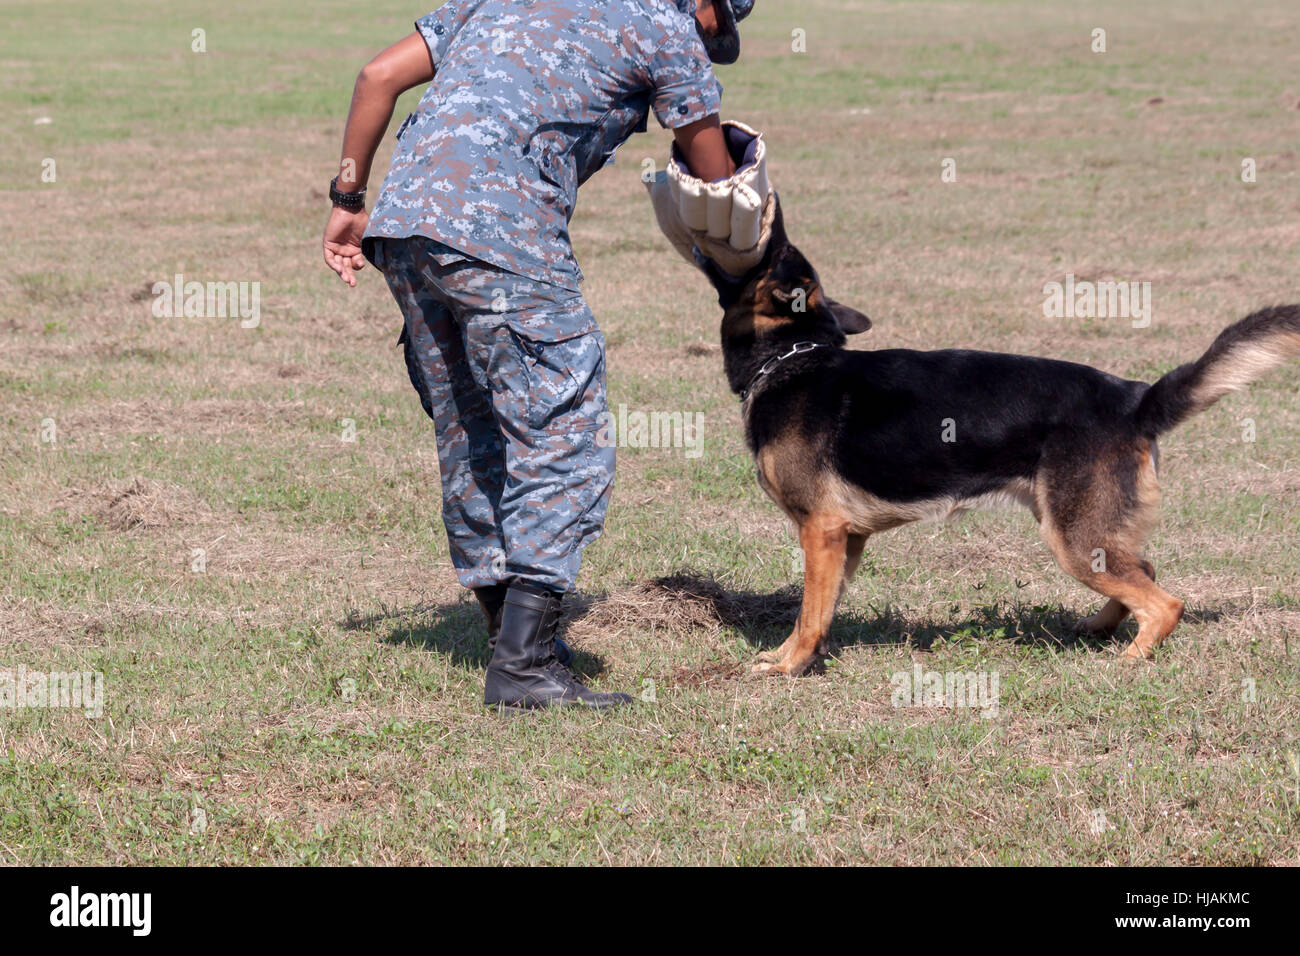 Soldiers from the K-9 dog unit works with his partner to apprehend a bad guy during a demonstration Stock Photo